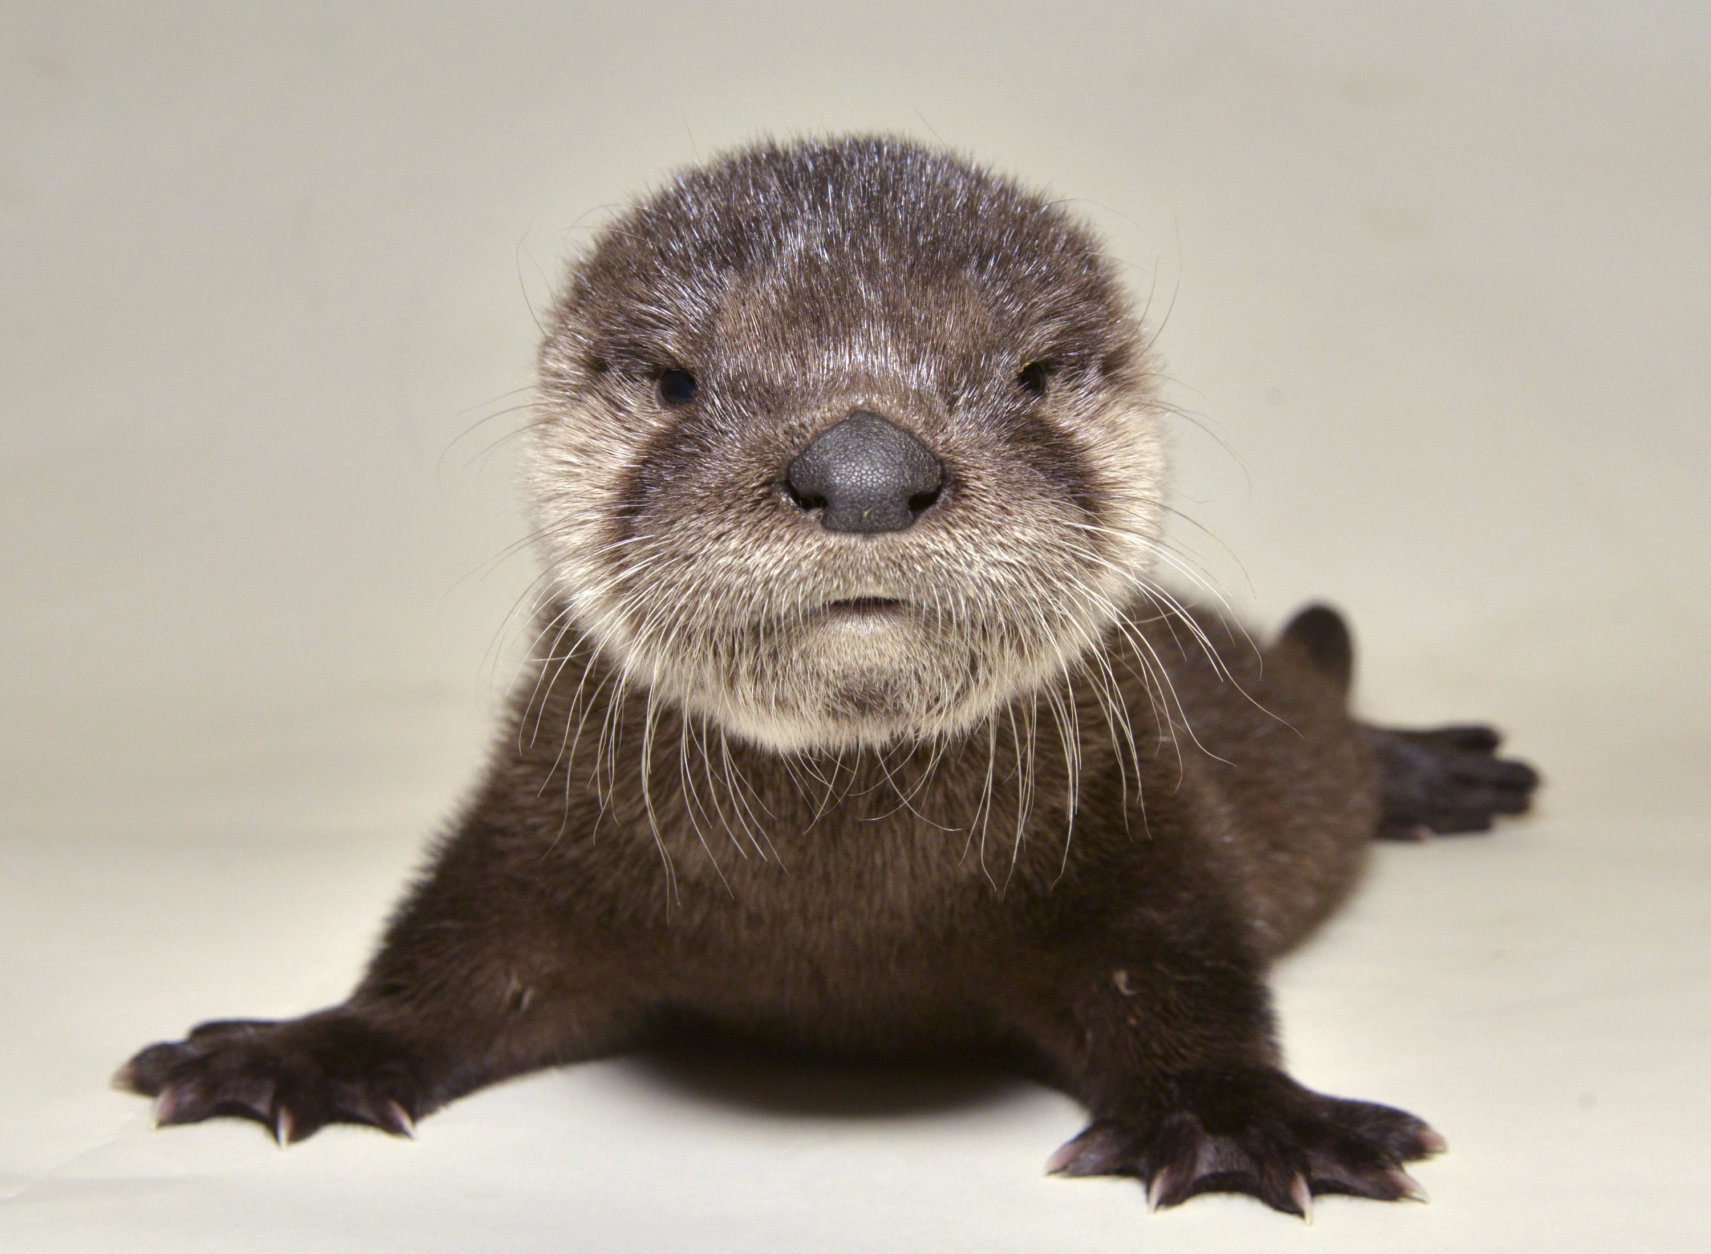 In this April 20, 2017, photo provided by the Arizona Game and Fish Department shows a rescued otter at the Adobe Mountain Wildlife Center in Phoenix, Arizona. The otter was described as dehydrated, hungry and infested with fleas when rescued, but Arizona Game and Fish wildlife staff cared for the otter and fed it a trout mash mixed with kitten's milk to provide appropriate nutrients. Once the otter's condition improved, it was handed off April 26 to Out of Africa Wildlife Park in Camp Verde. (George Andrejko/Arizona Game and Fish Department via AP)